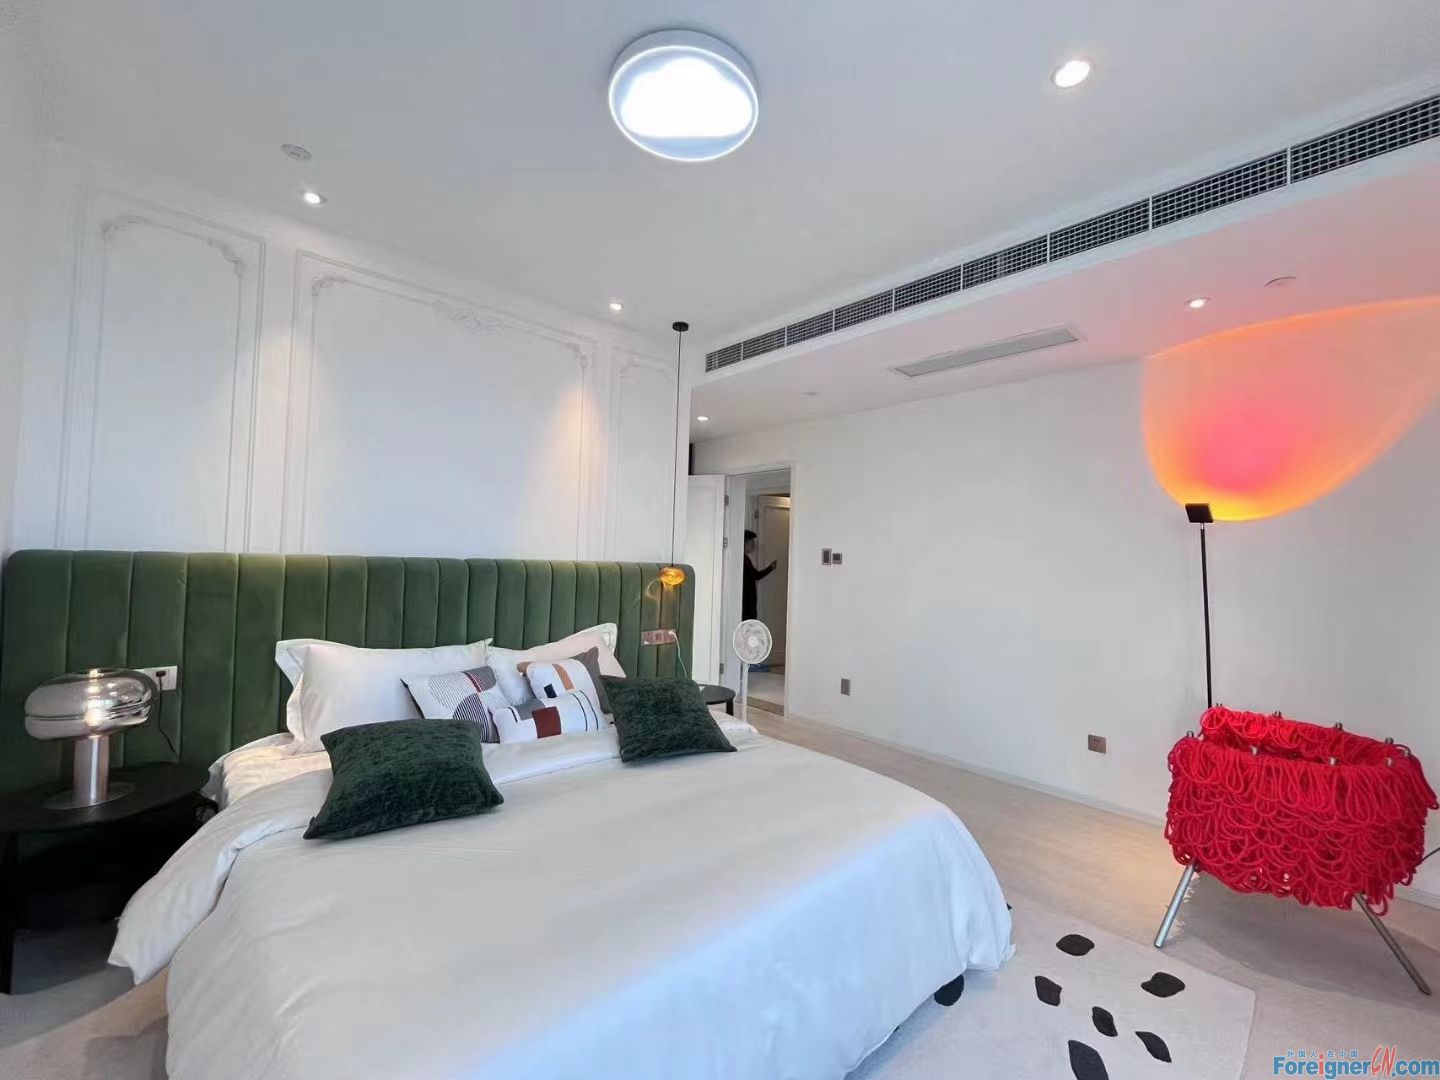 Fantastic! Luxurious HLCC Apartment Rent in SIP,Suzhou/ 2 bedrooms and 2 bathrooms/Newly renovated & Modern design/Close to Times Square,Subway station